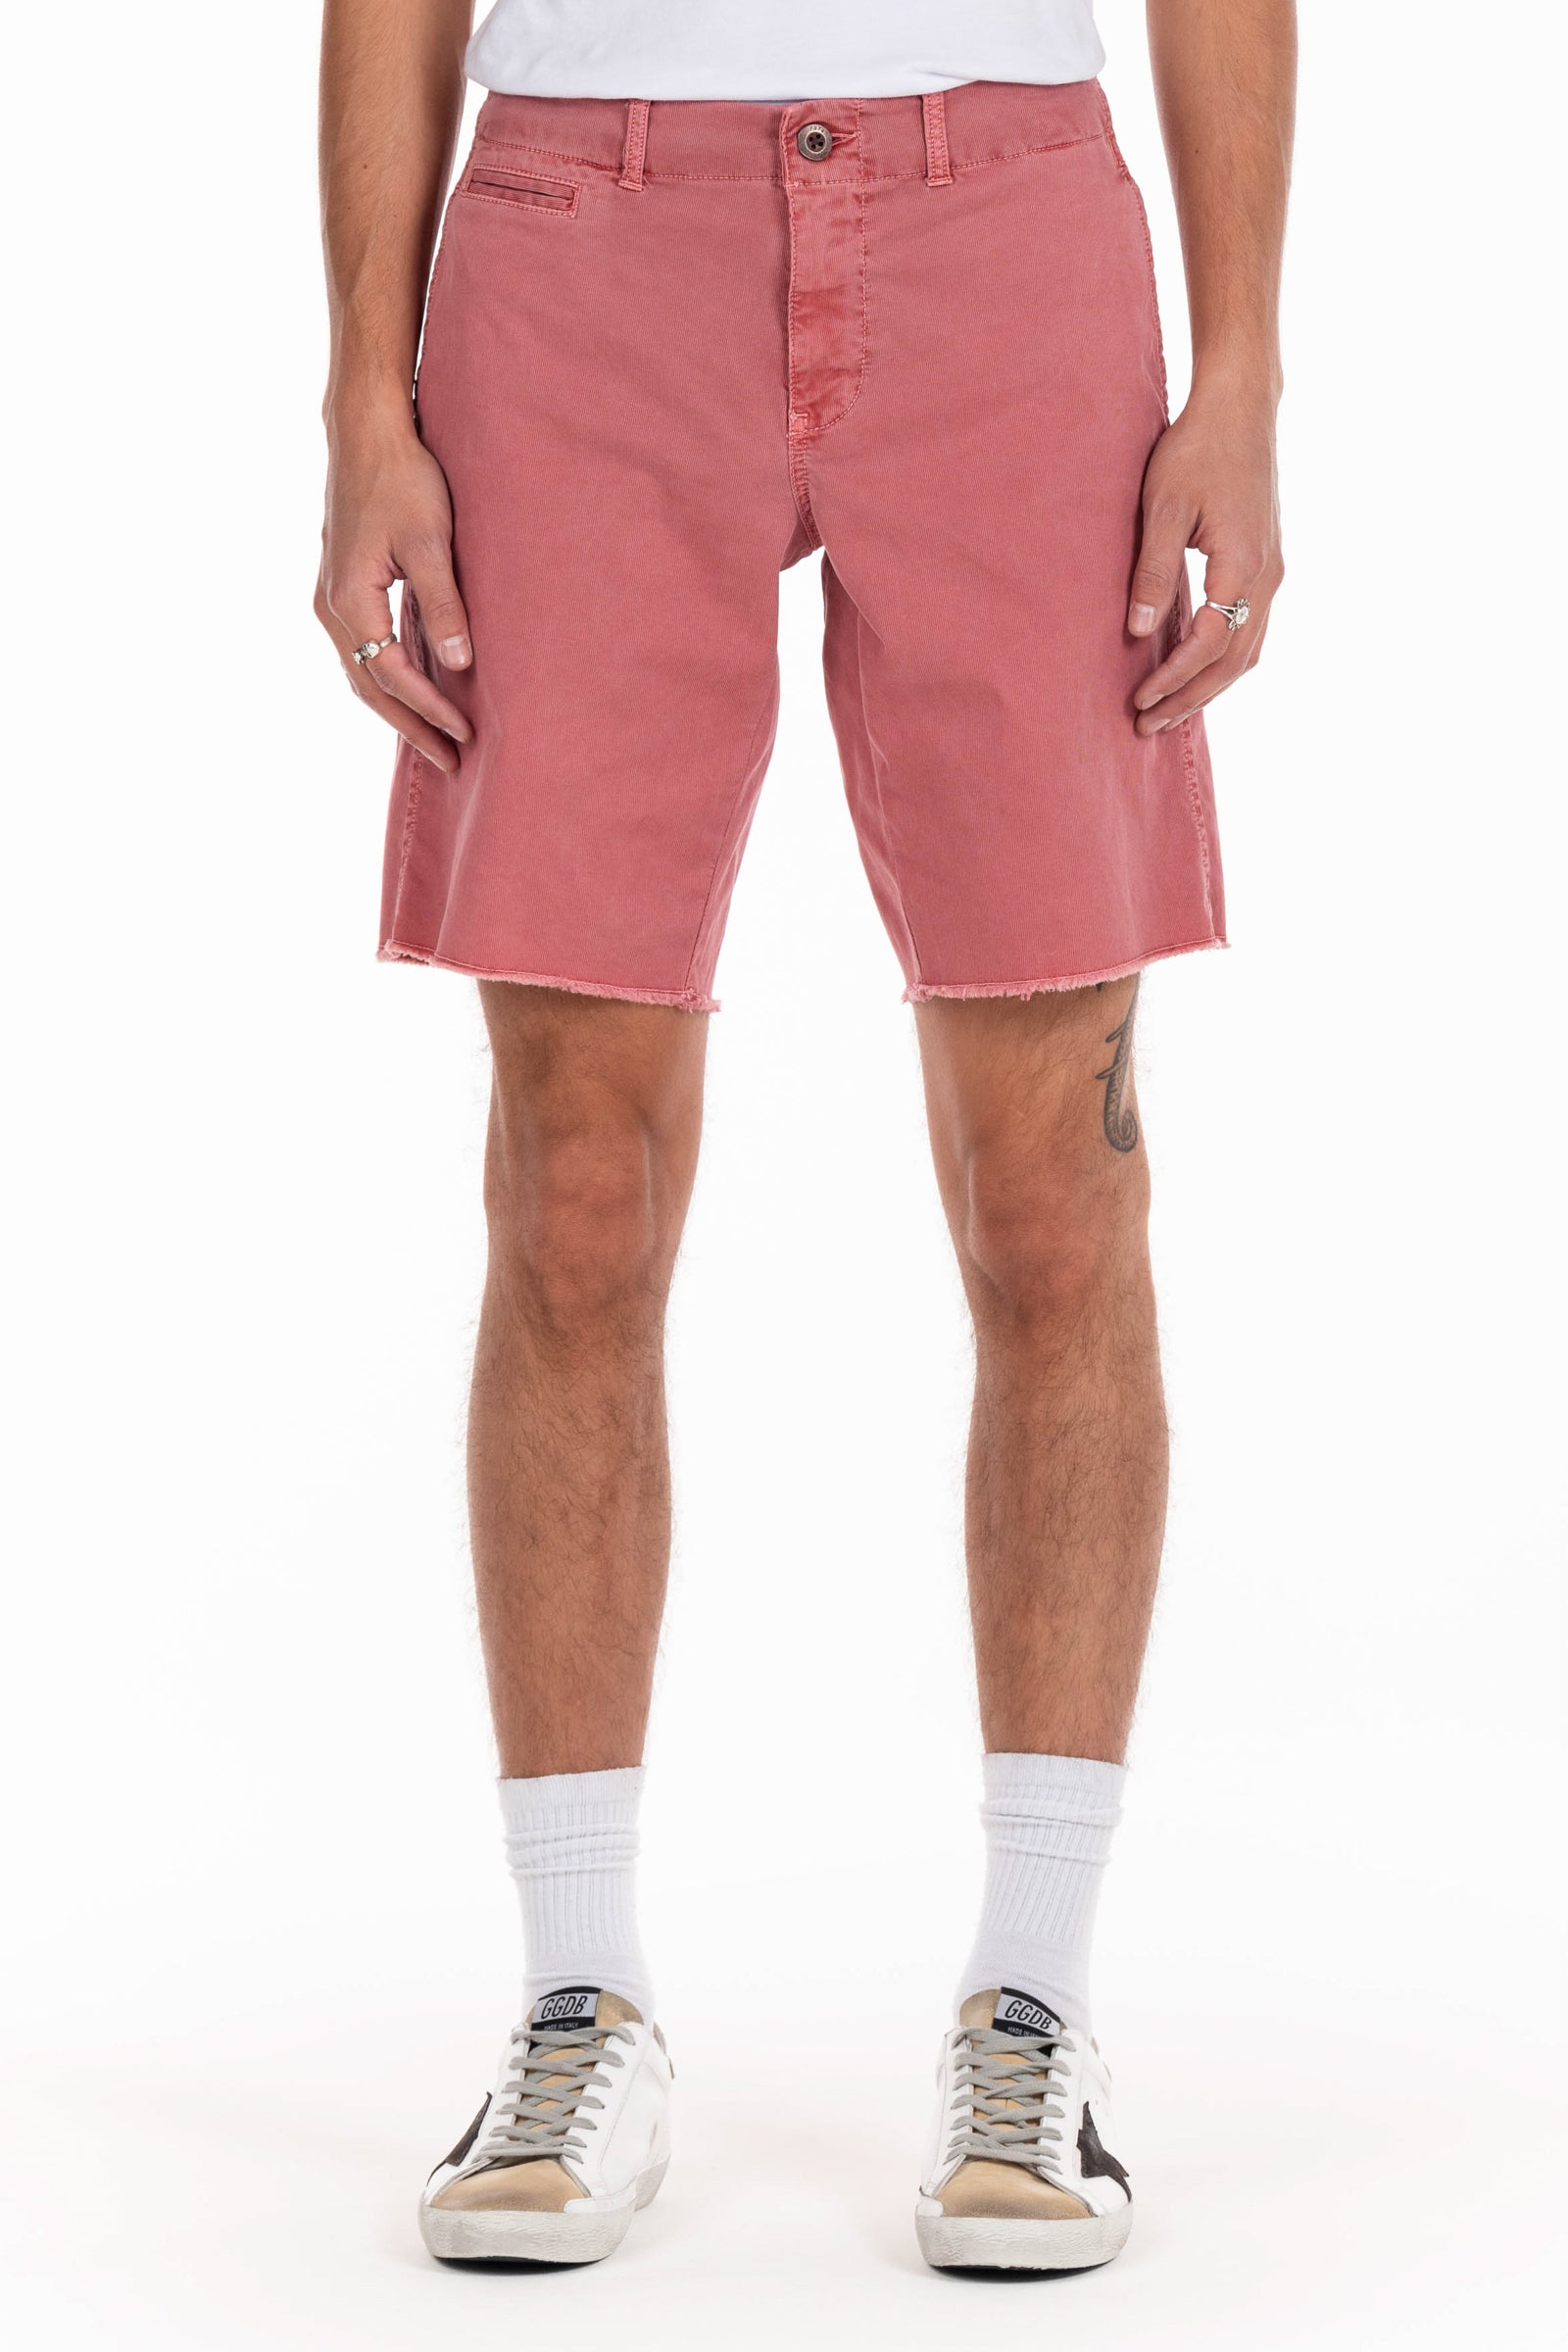 Original Paperbacks Rockland Chino Short in Berry on Model Cropped Front View